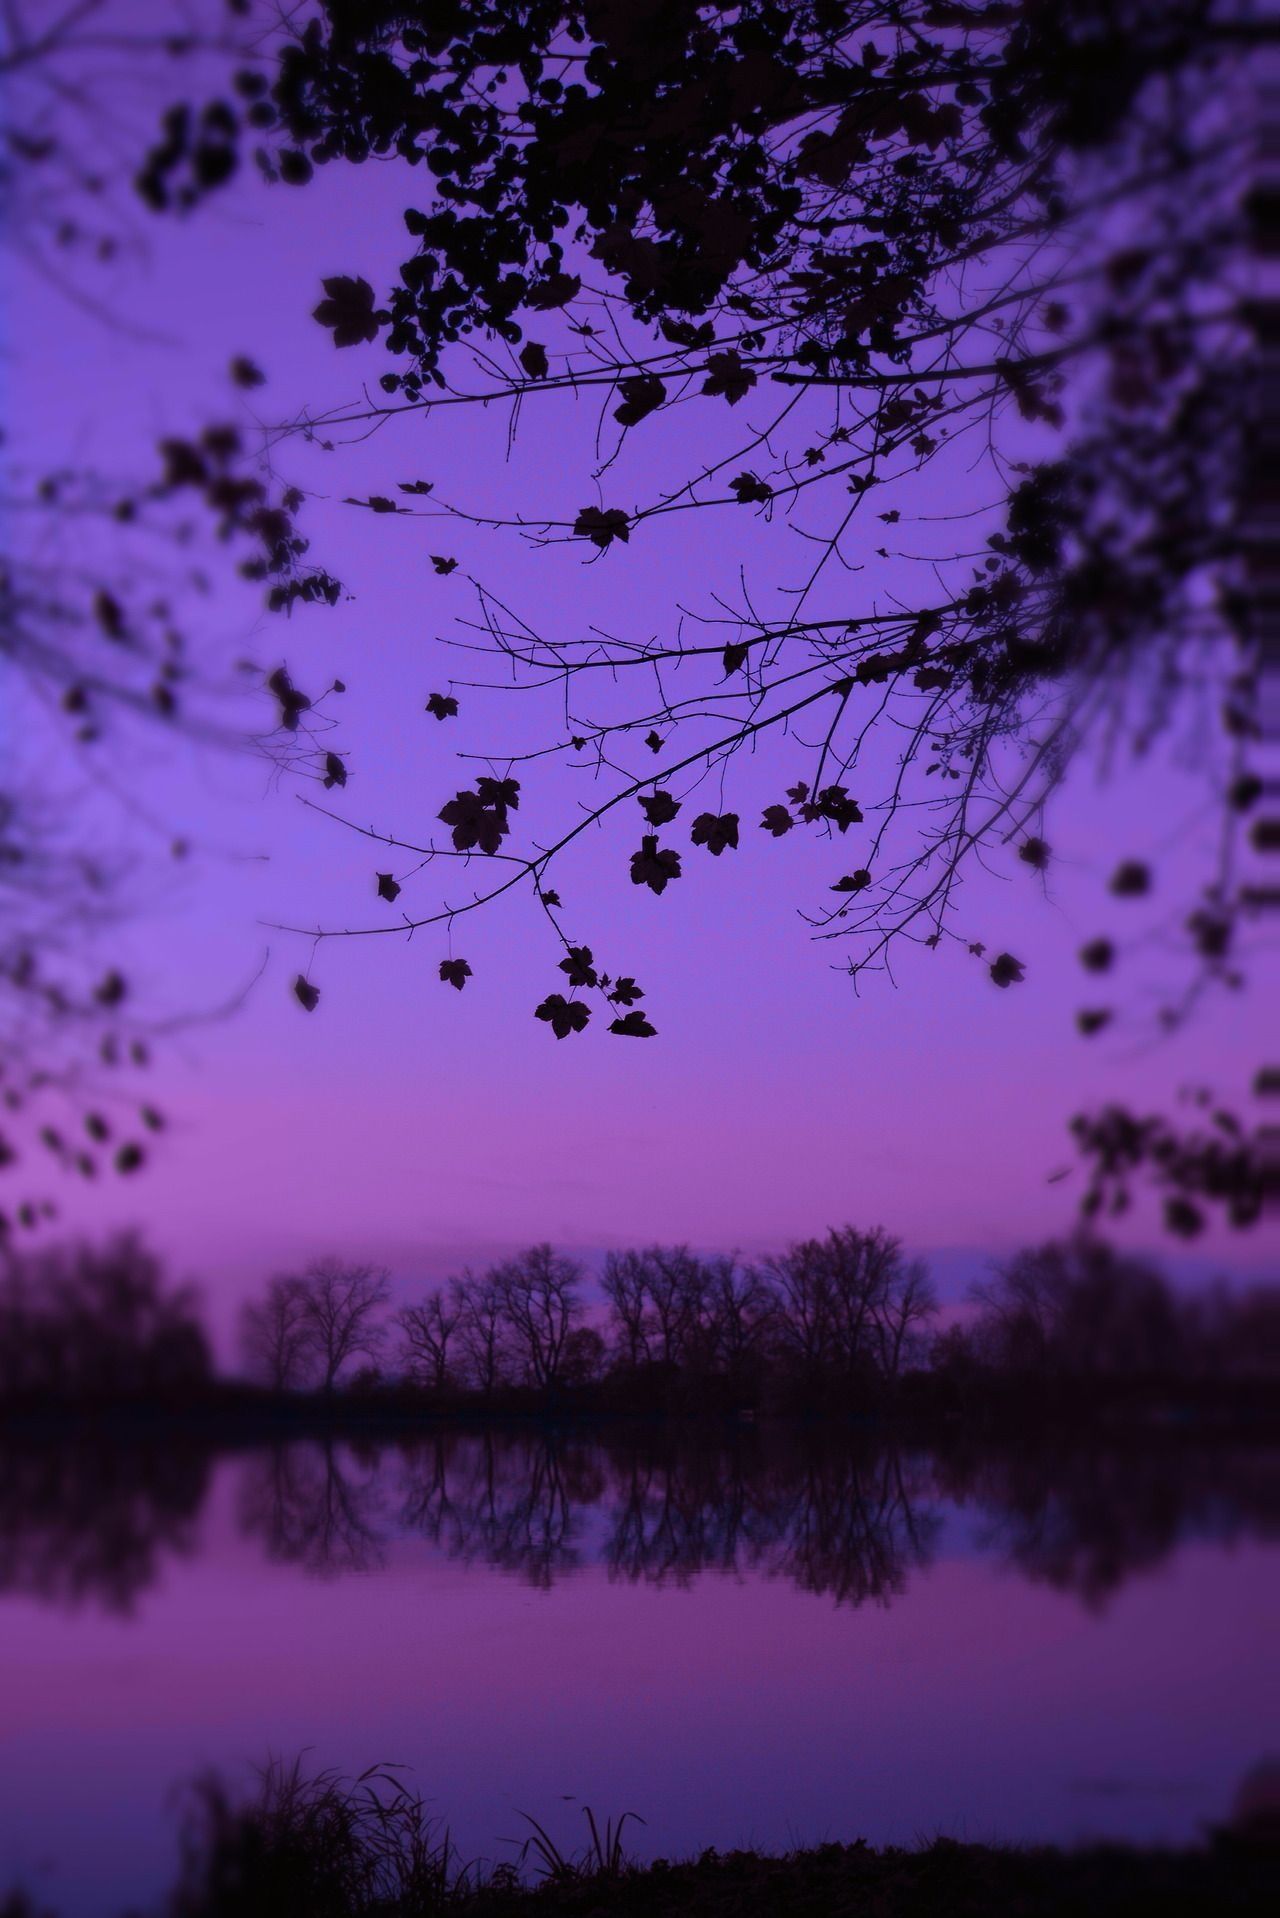 A purple sky with trees and water in the background - Nature